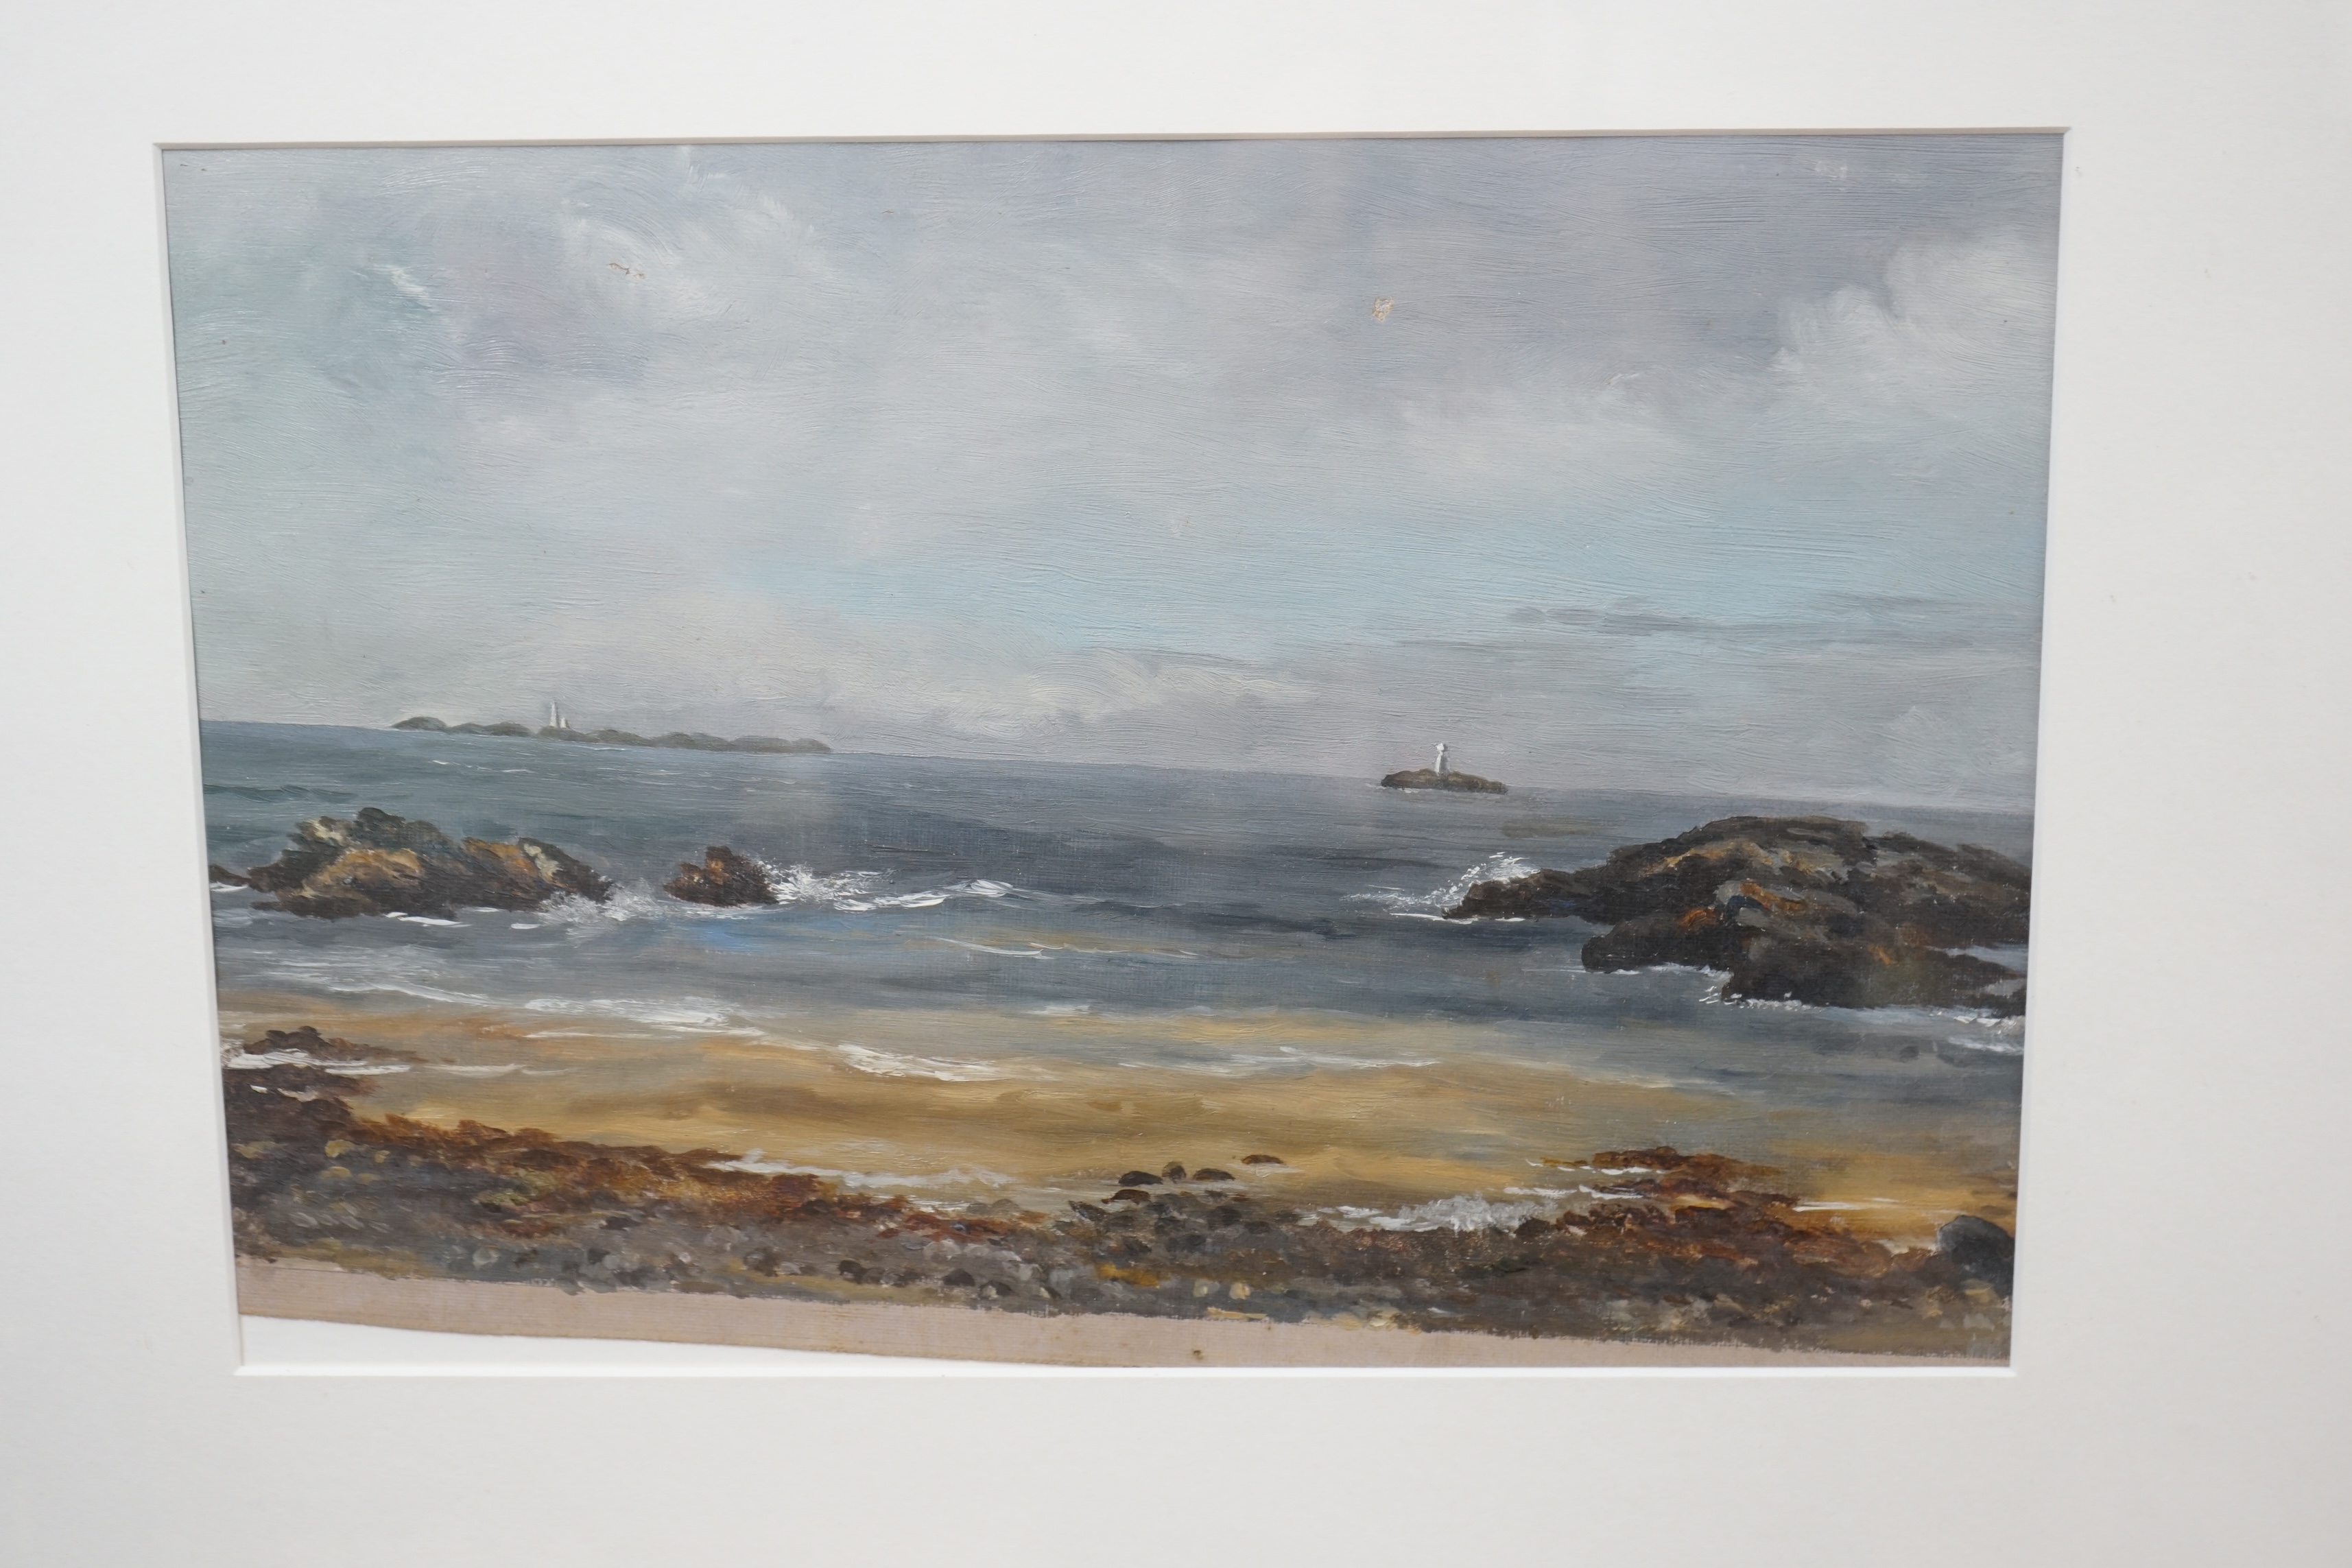 Oil on canvas, Coastal scene 21.5 x 32cm. Condition - fair to good, loose within the frame